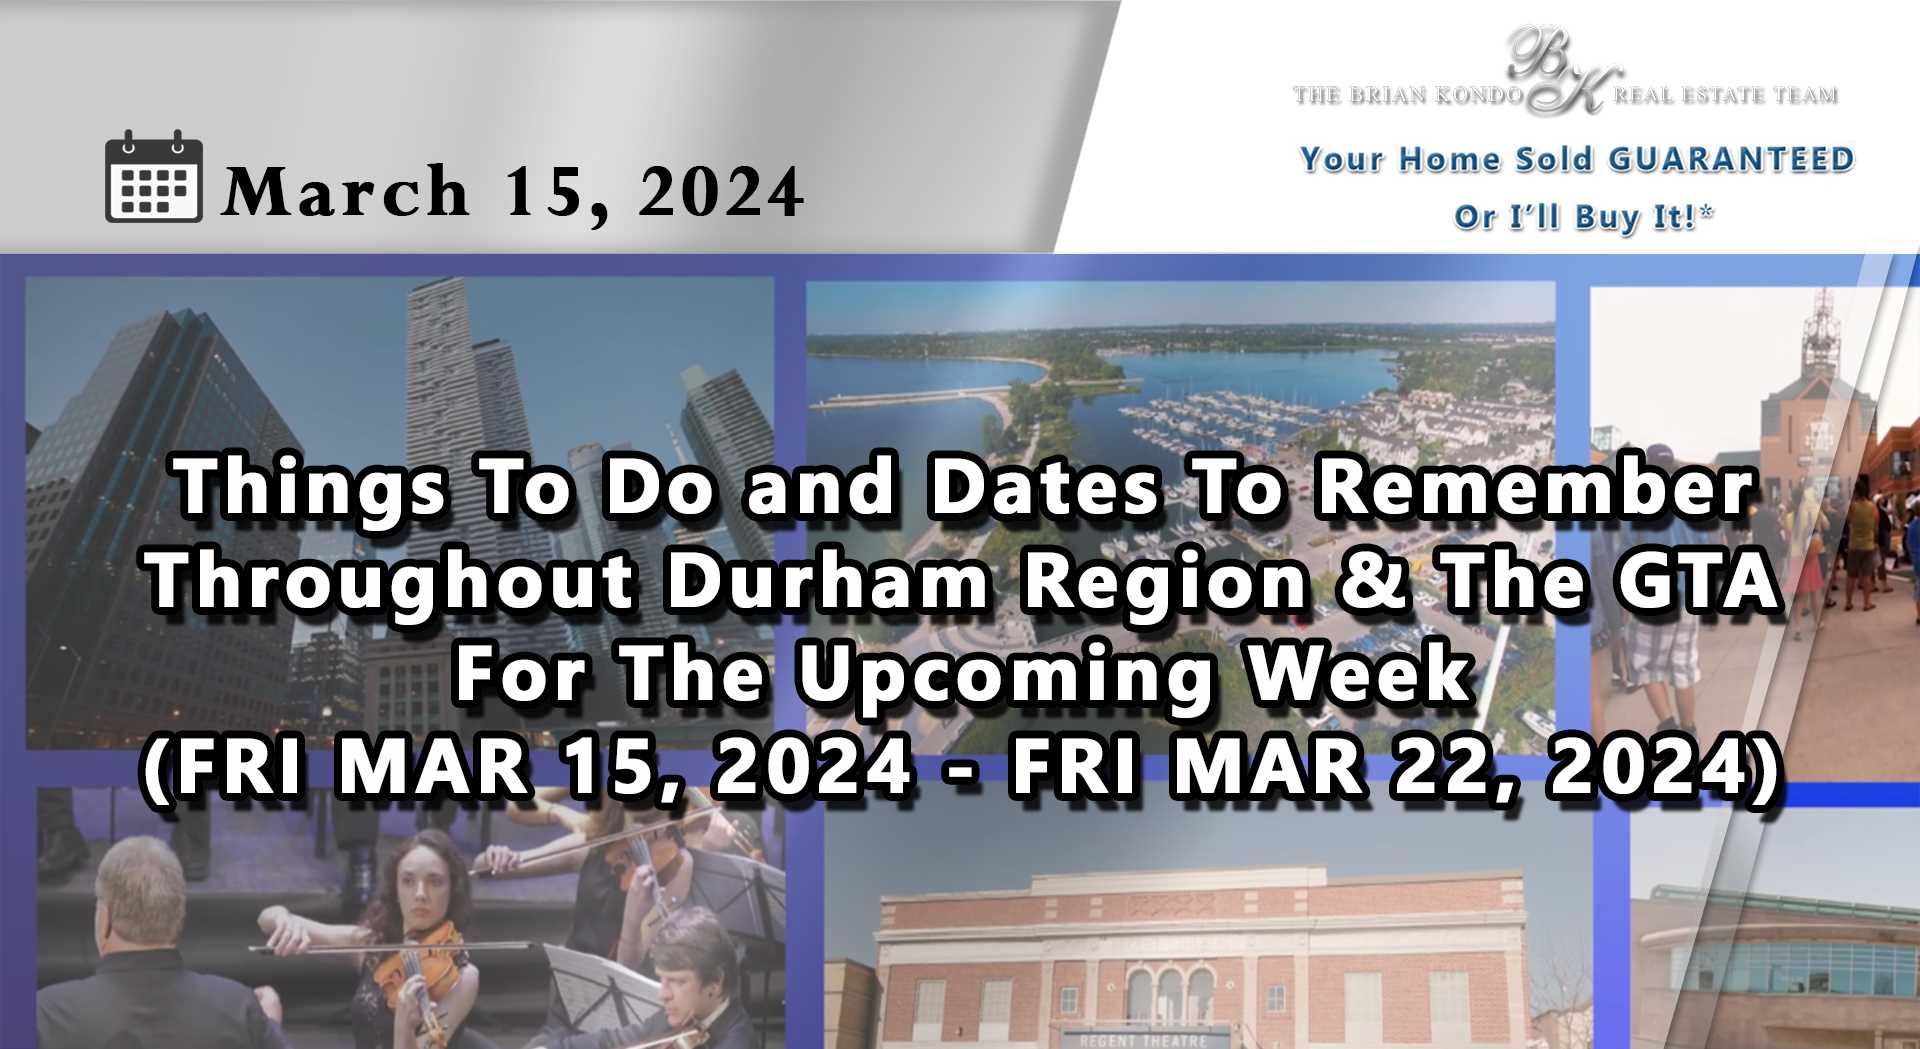 Things To Do and Dates To Remember Throughout Durham Region and The GTA For The Upcoming Week (FRI MAR 15, 2024 - FRI MAR 22, 2024)